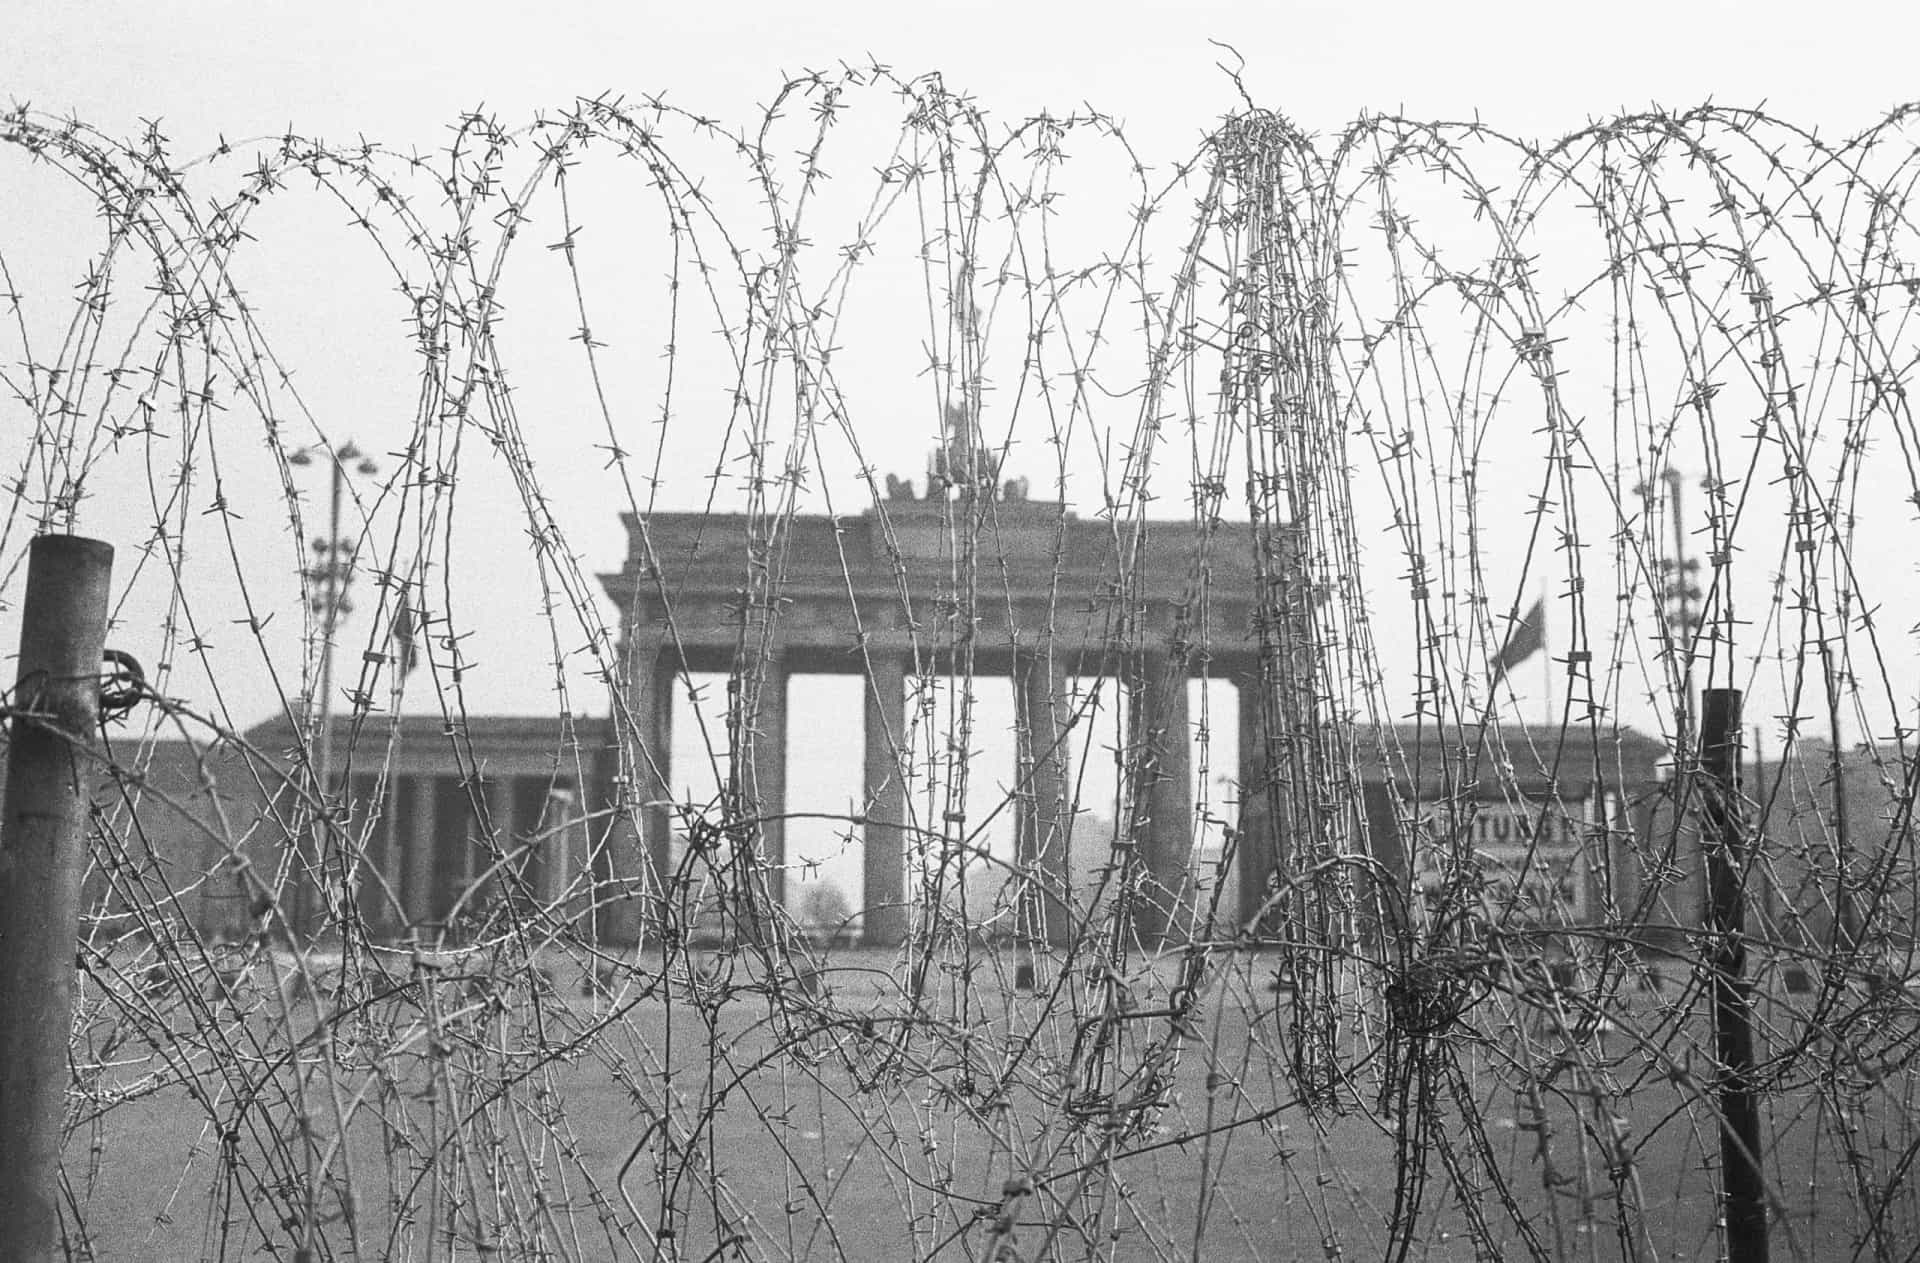 <p>This June 1, 1961 photograph shows the Brandenburg Gate wired shut, but before building of the wall had commenced. The monumental city <a href="https://www.starsinsider.com/travel/374301/where-to-admire-the-worlds-most-iconic-city-gates" rel="noopener">gate</a> stood on the dividing line between East and West Berlin.</p><p><a href="https://www.msn.com/en-us/community/channel/vid-7xx8mnucu55yw63we9va2gwr7uihbxwc68fxqp25x6tg4ftibpra?cvid=94631541bc0f4f89bfd59158d696ad7e">Follow us and access great exclusive content everyday</a></p>